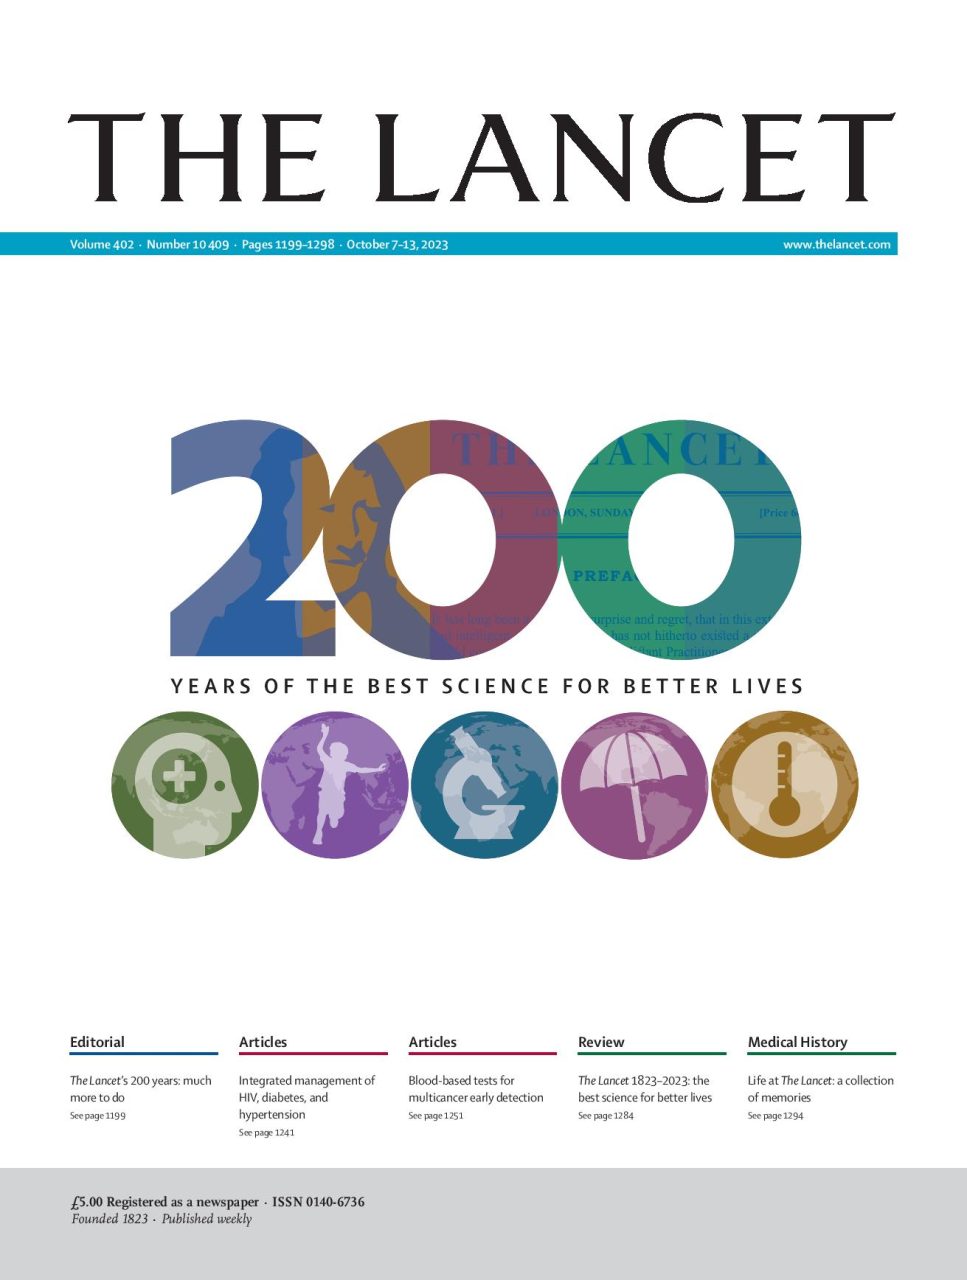 200 years of The Lancet. – The Lancet